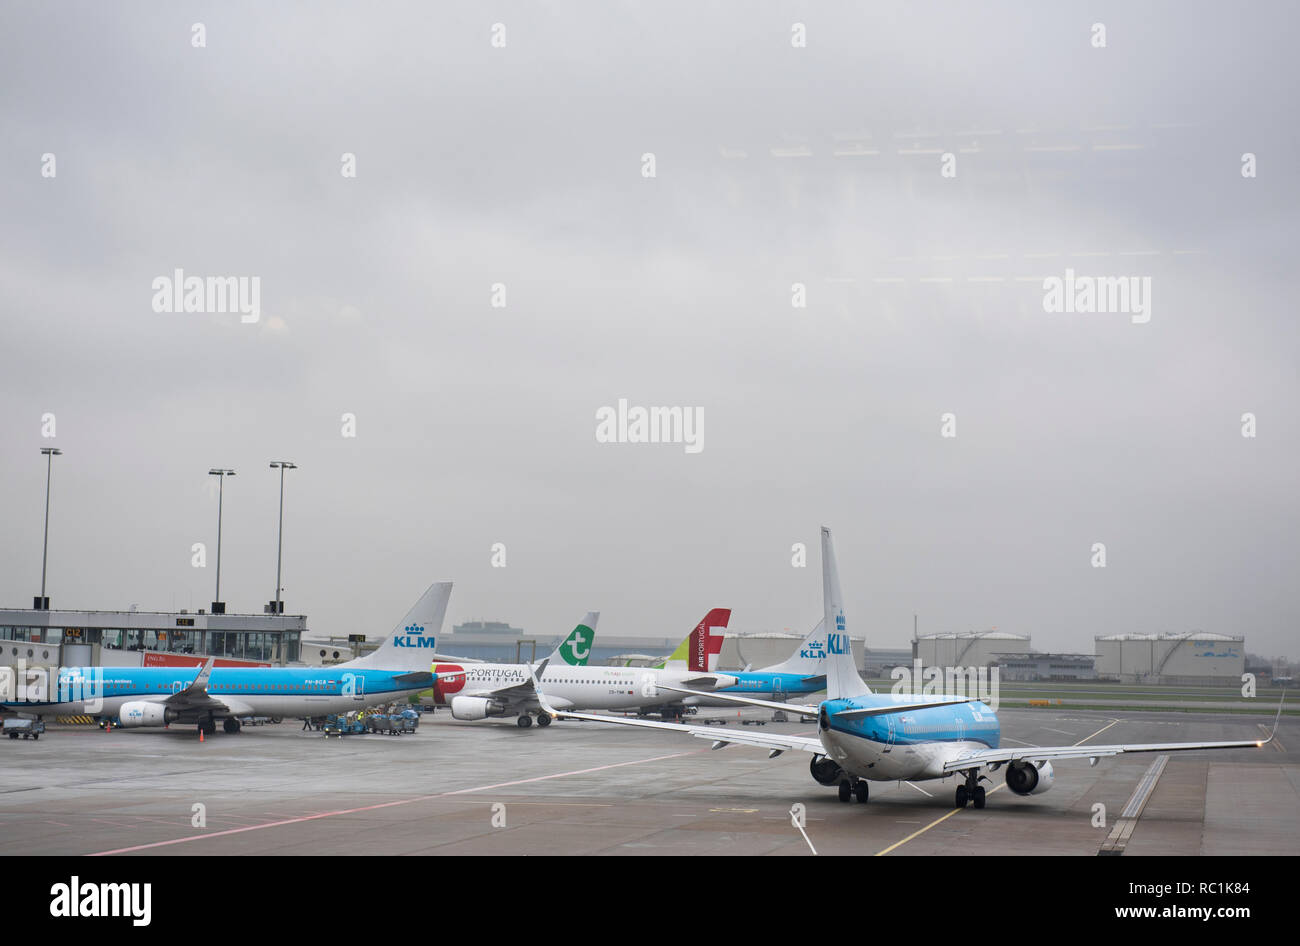 KLM Royal Dutch Airlines planes are seen at Amsterdam Schiphol Airport runway. Stock Photo